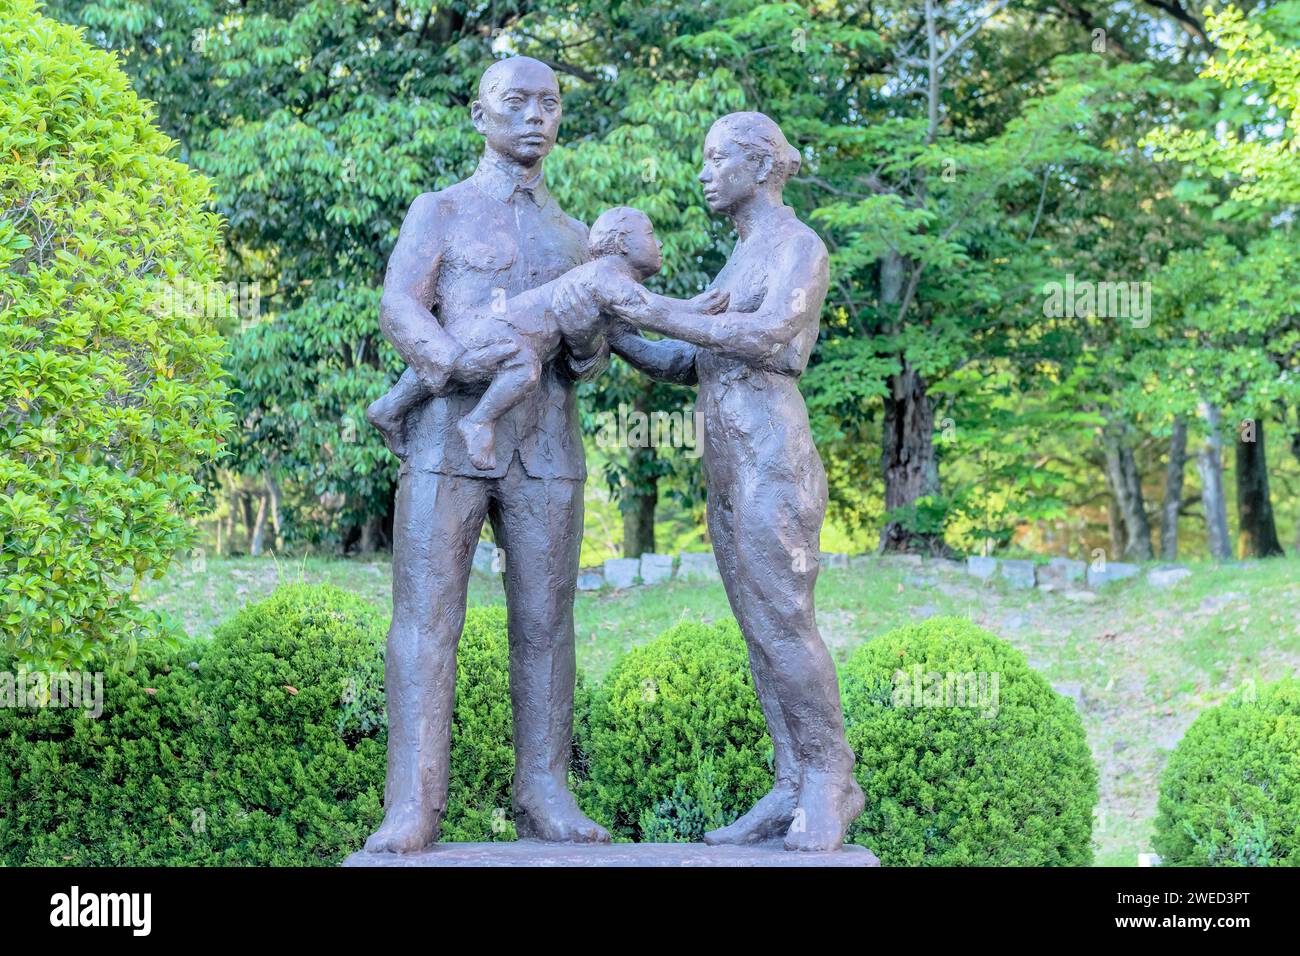 Bronze statue of Japanese man, woman and child in nature park. Artist unknown Stock Photo